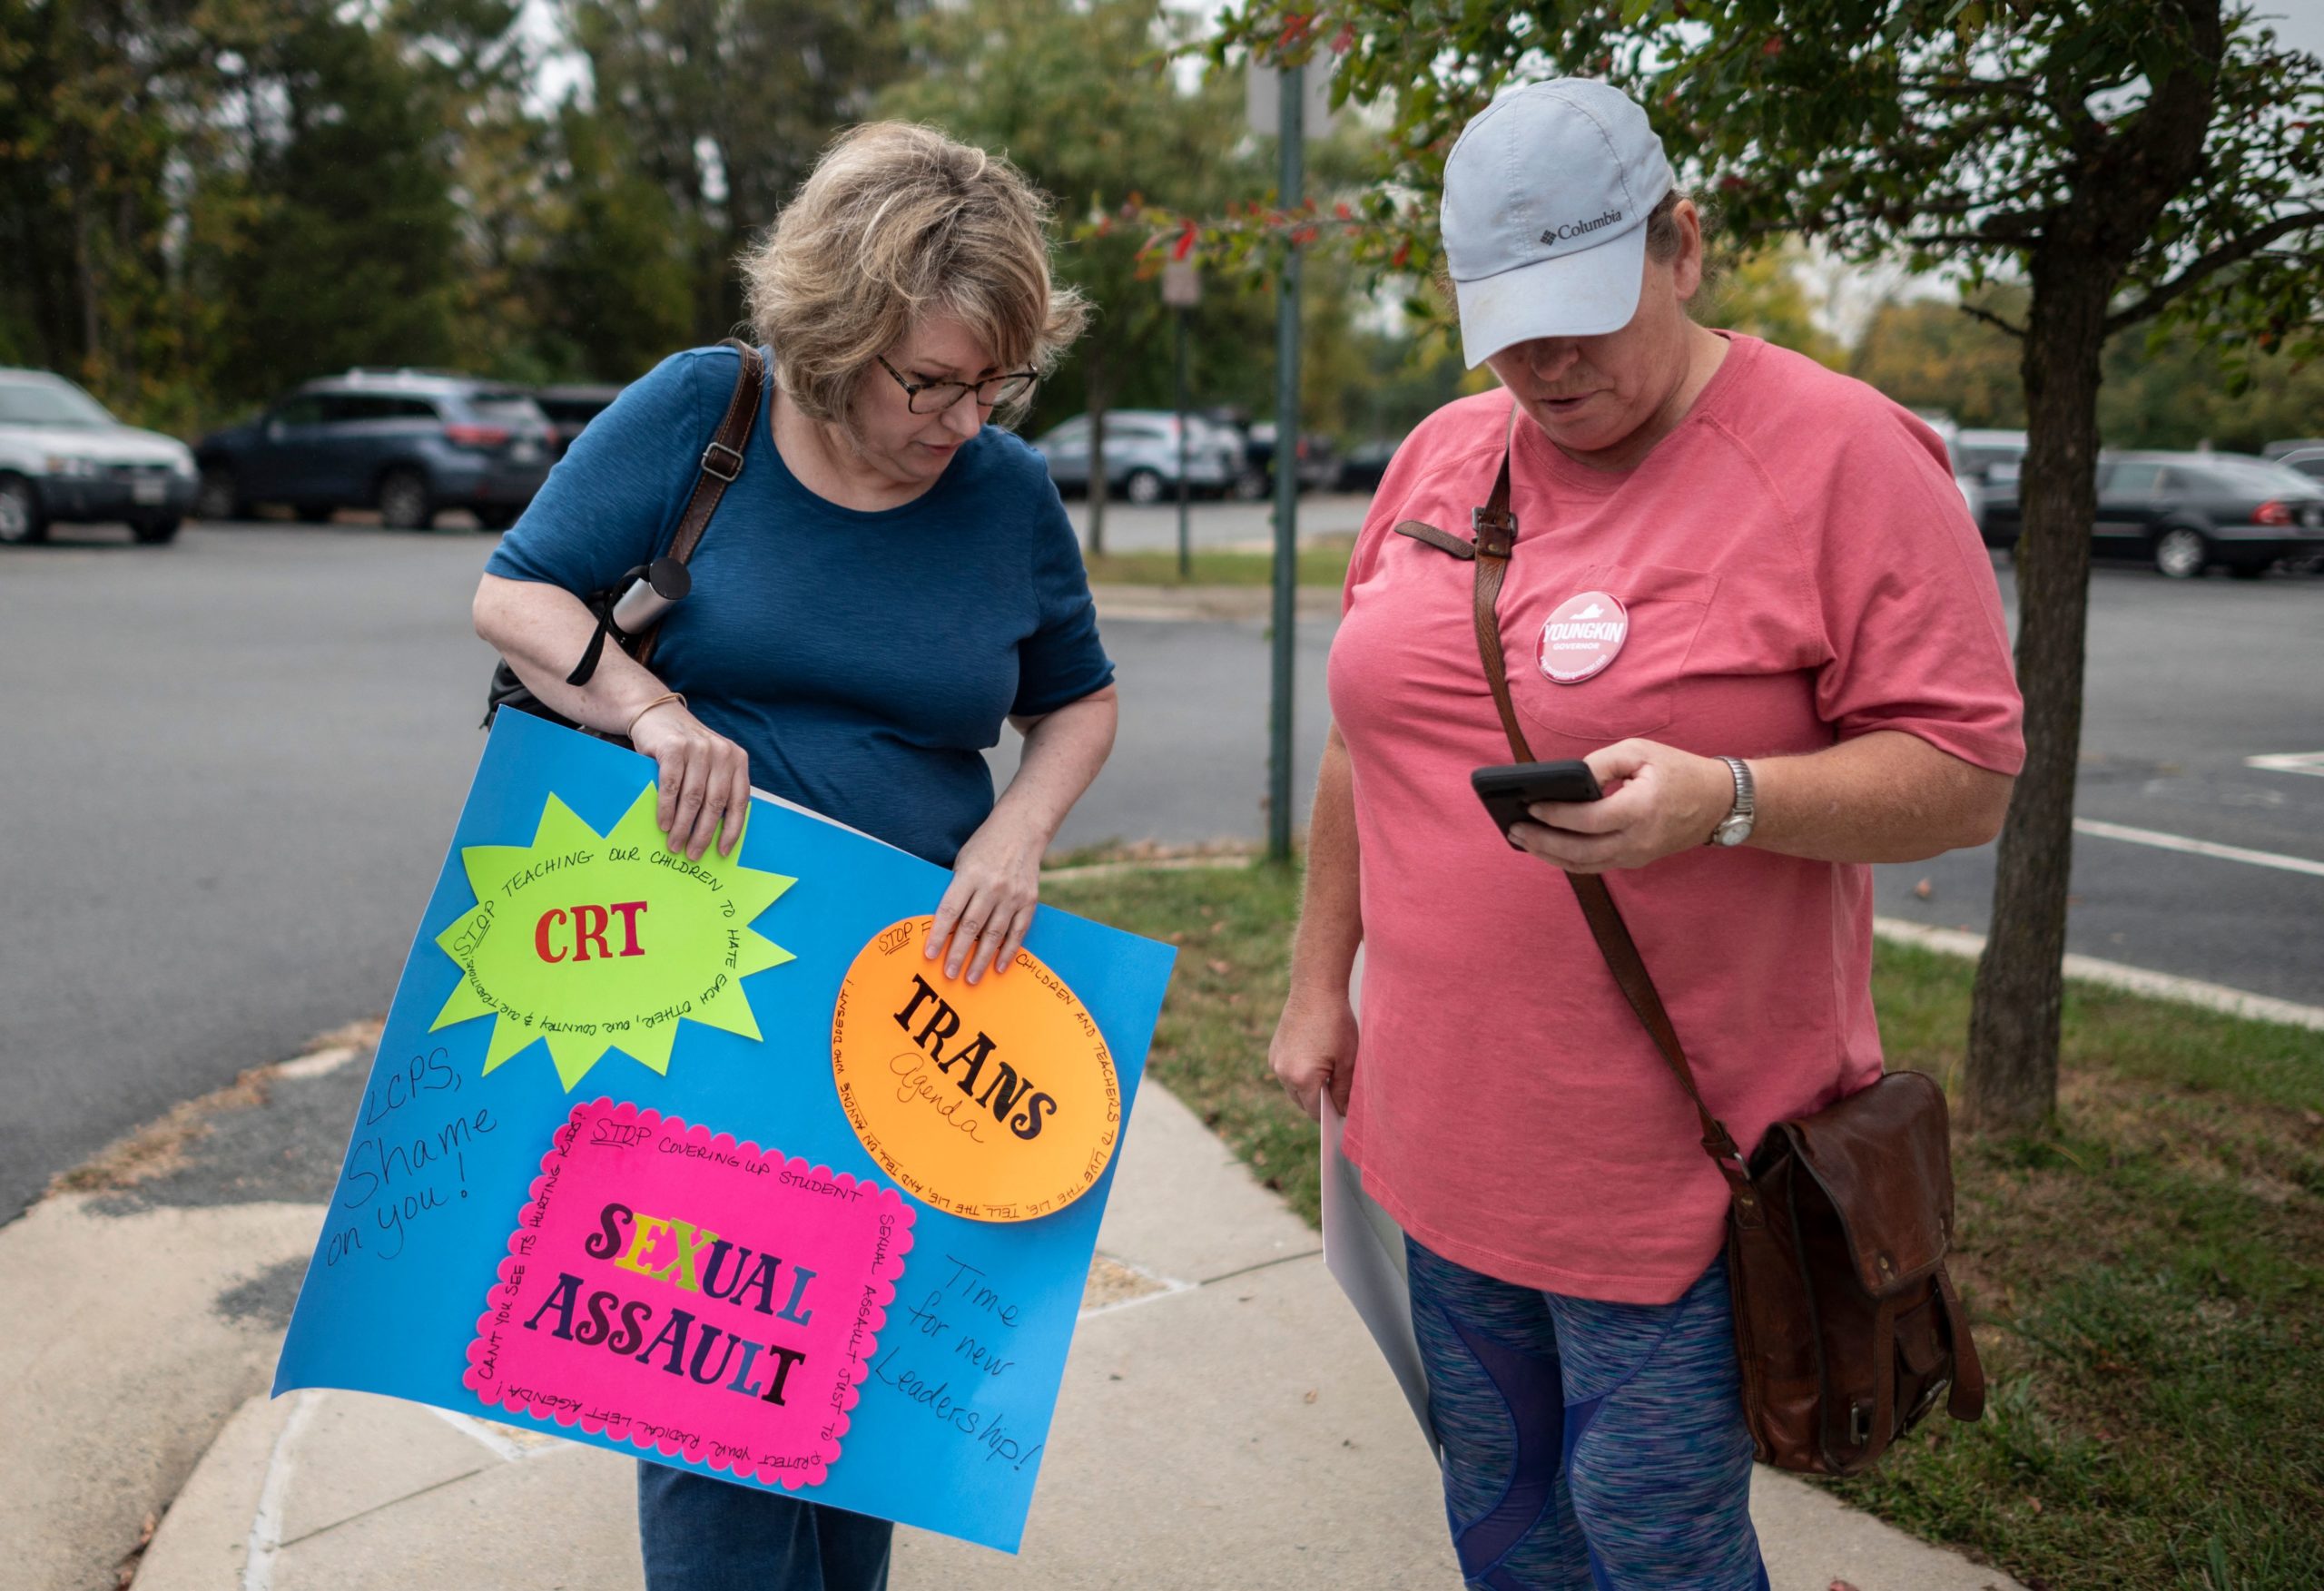 Protesters and activists stand outside a Loudoun County Public Schools (LCPS) board meeting in Ashburn, Virginia on October 12, 2021. (Photo by ANDREW CABALLERO-REYNOLDS/AFP via Getty Images)